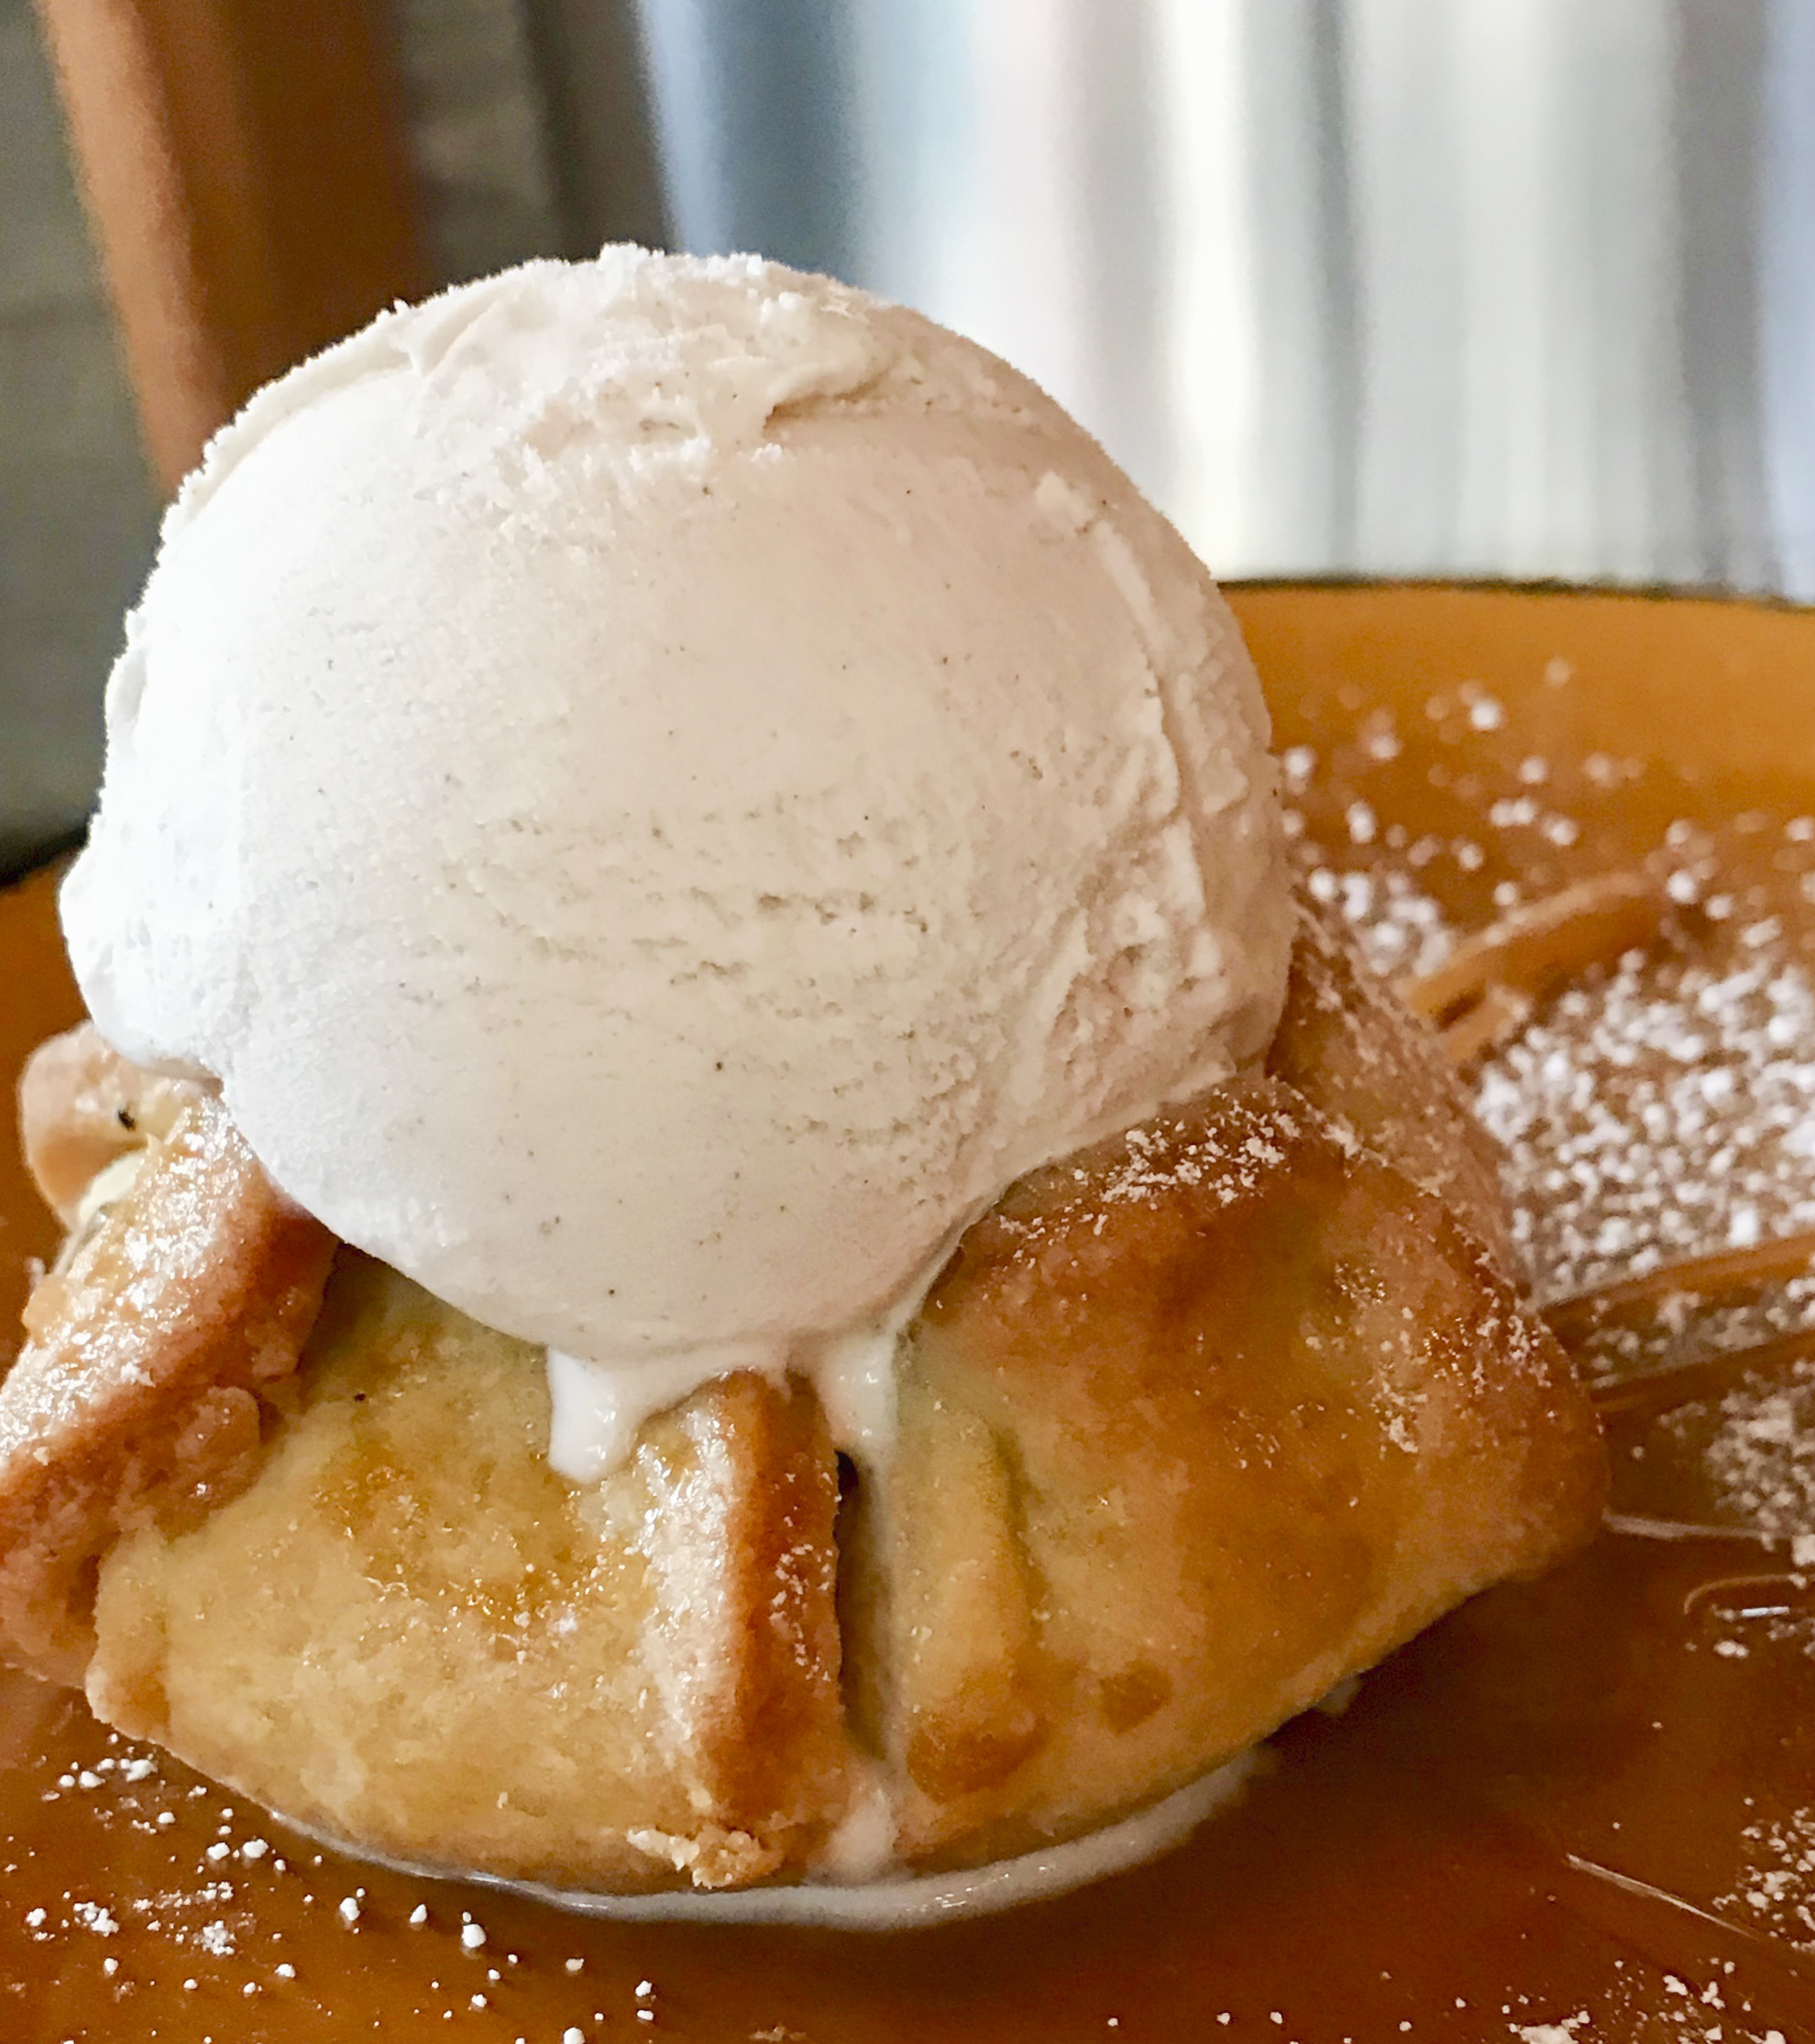 Apple Tort topped with cinnamon ice cream from Oak and Stone